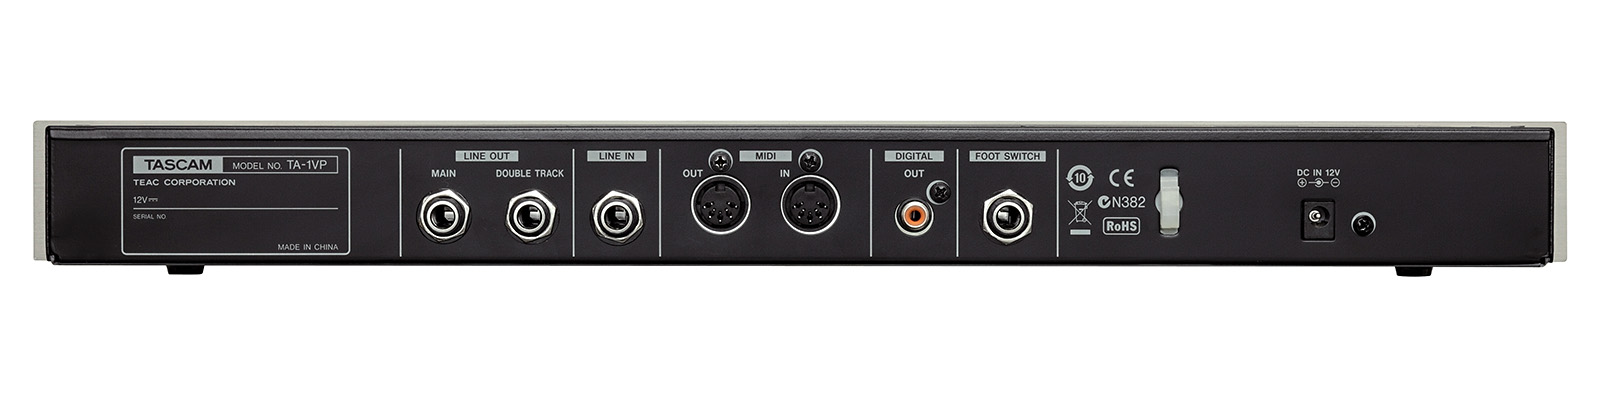 TA-1VP | FEATURES | TASCAM - United States